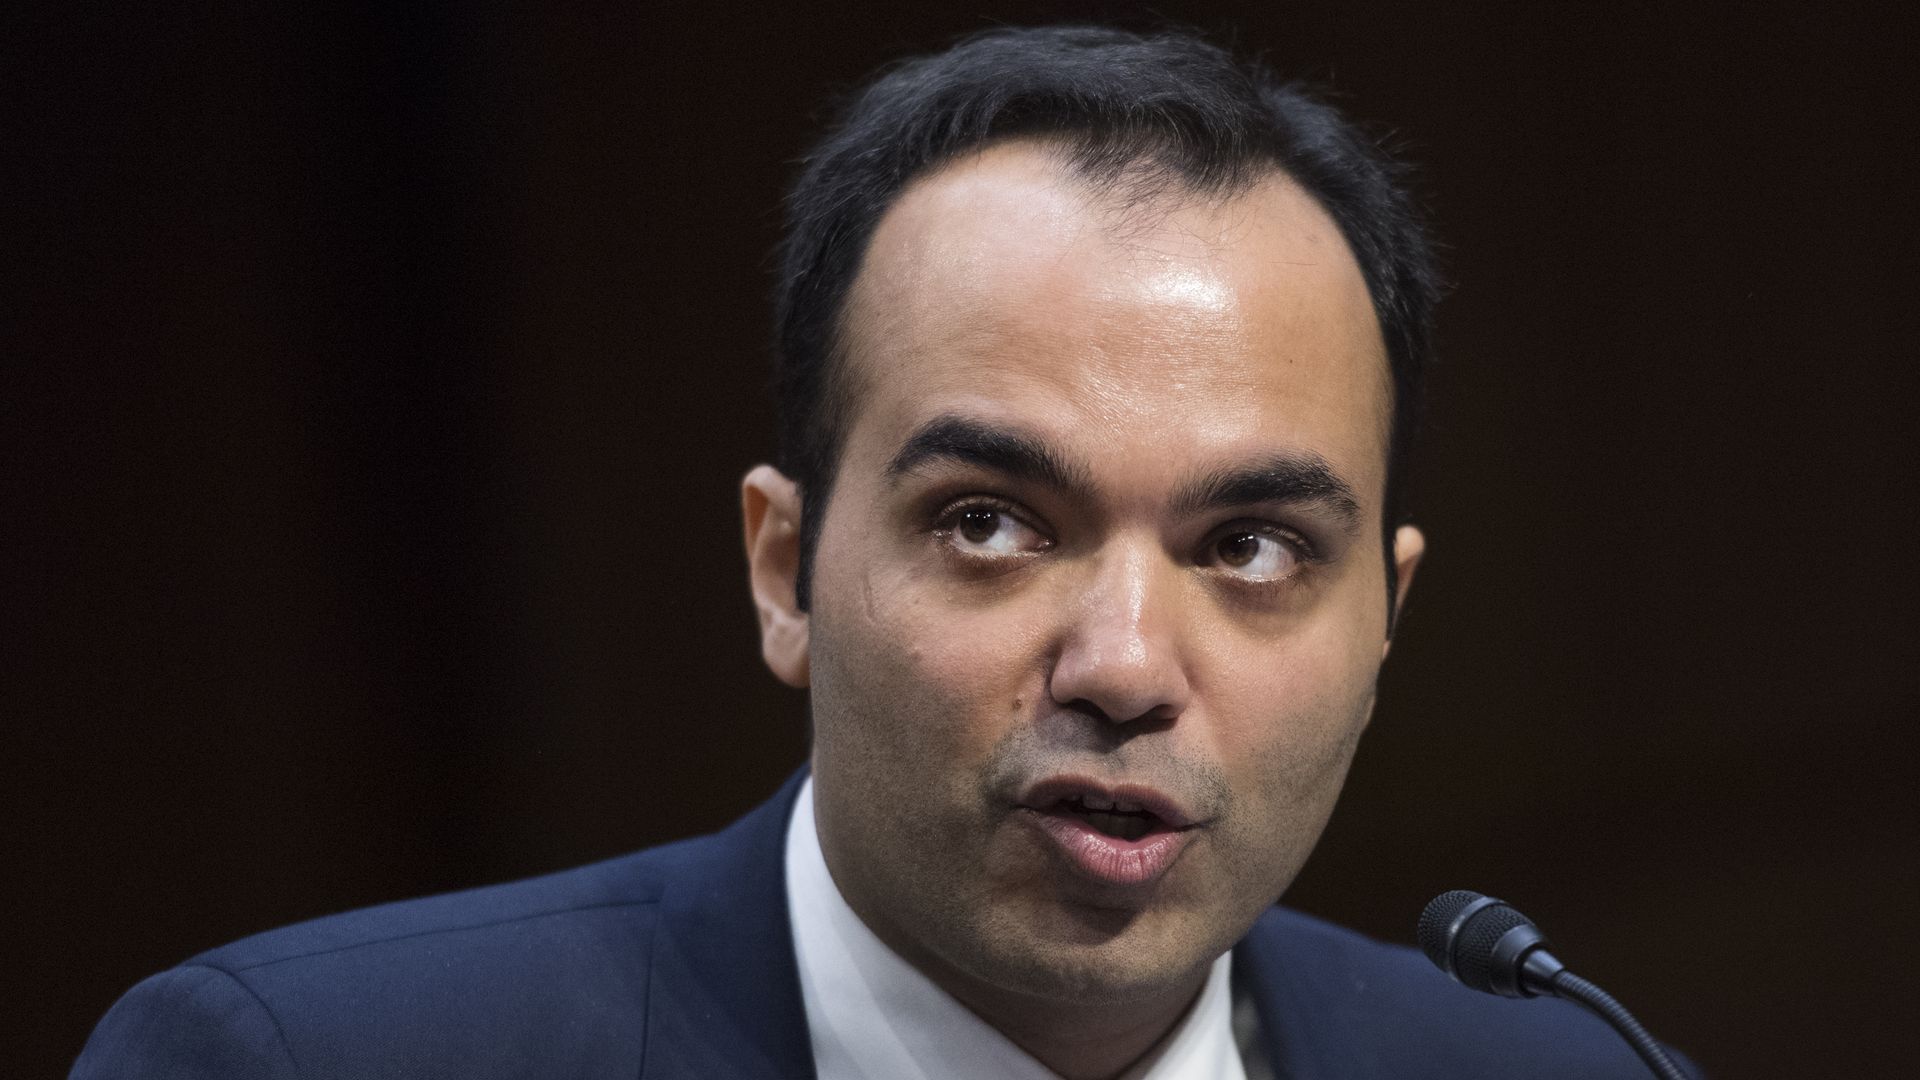 FTC Commissioner Rohit Chopra speaks at a microphone, wearing a suit and tie